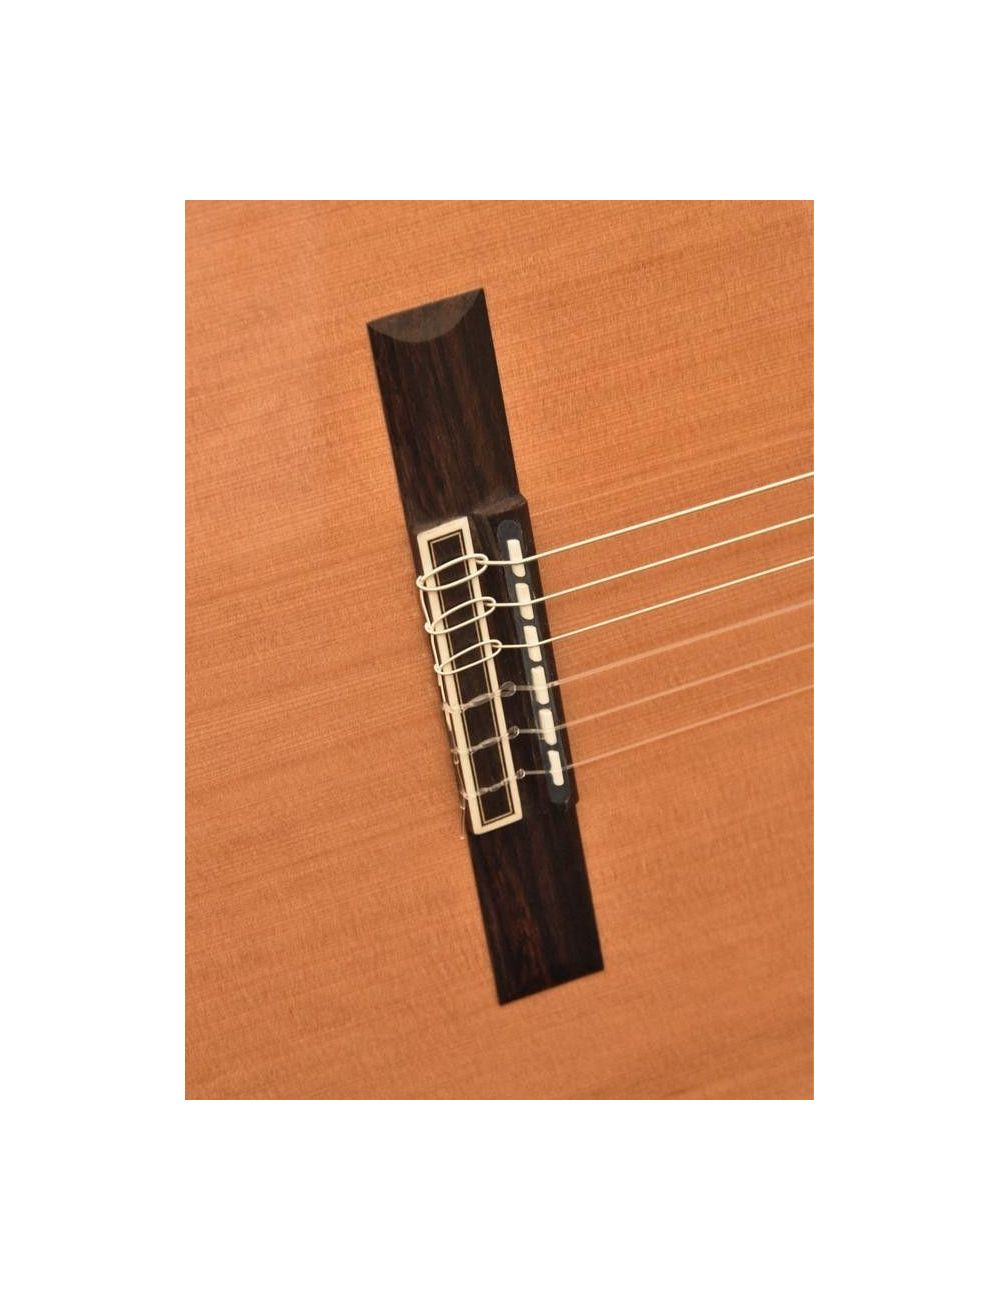 Camps CE600 Electro Classical Guitar CE-600 Electro-Classical